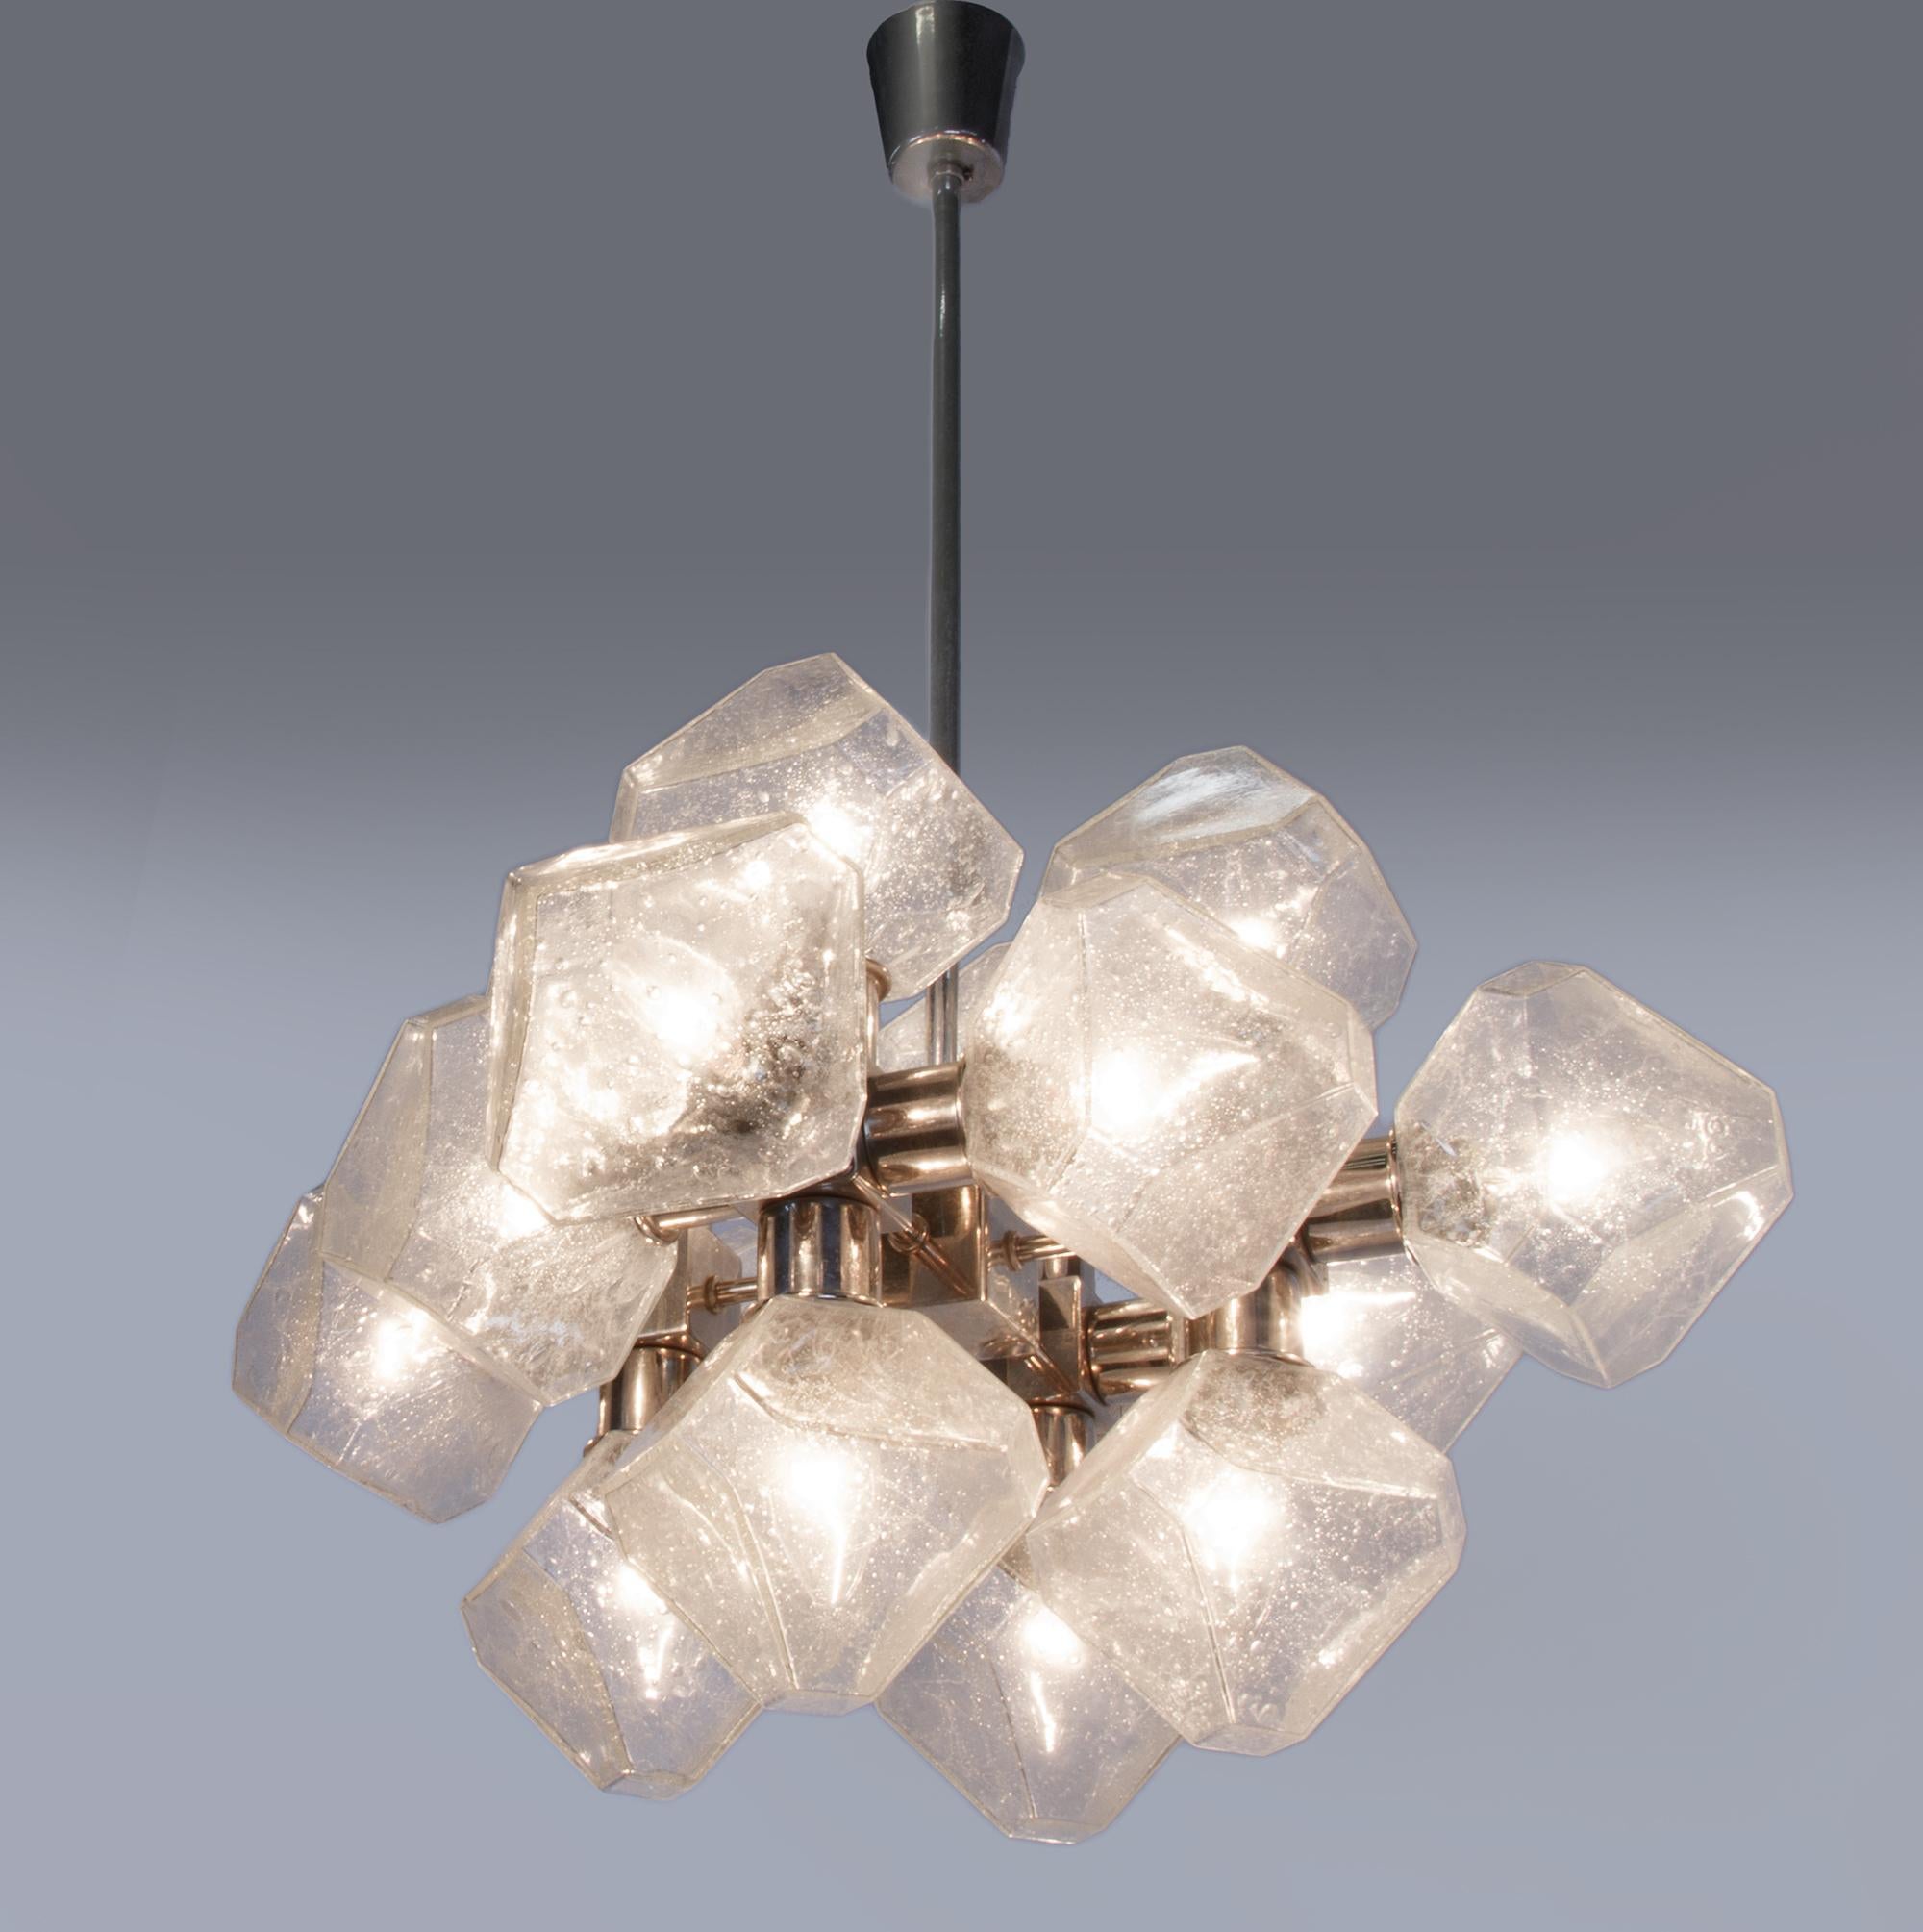 High quality lamp with 16 glass bodies made by Cosack, Germany in the 1960s. The chandelier is made of chrome-plated metal and very nicely shaped glass. The clear glass has small air inclusions. Gem from the time. With this light you make a clear